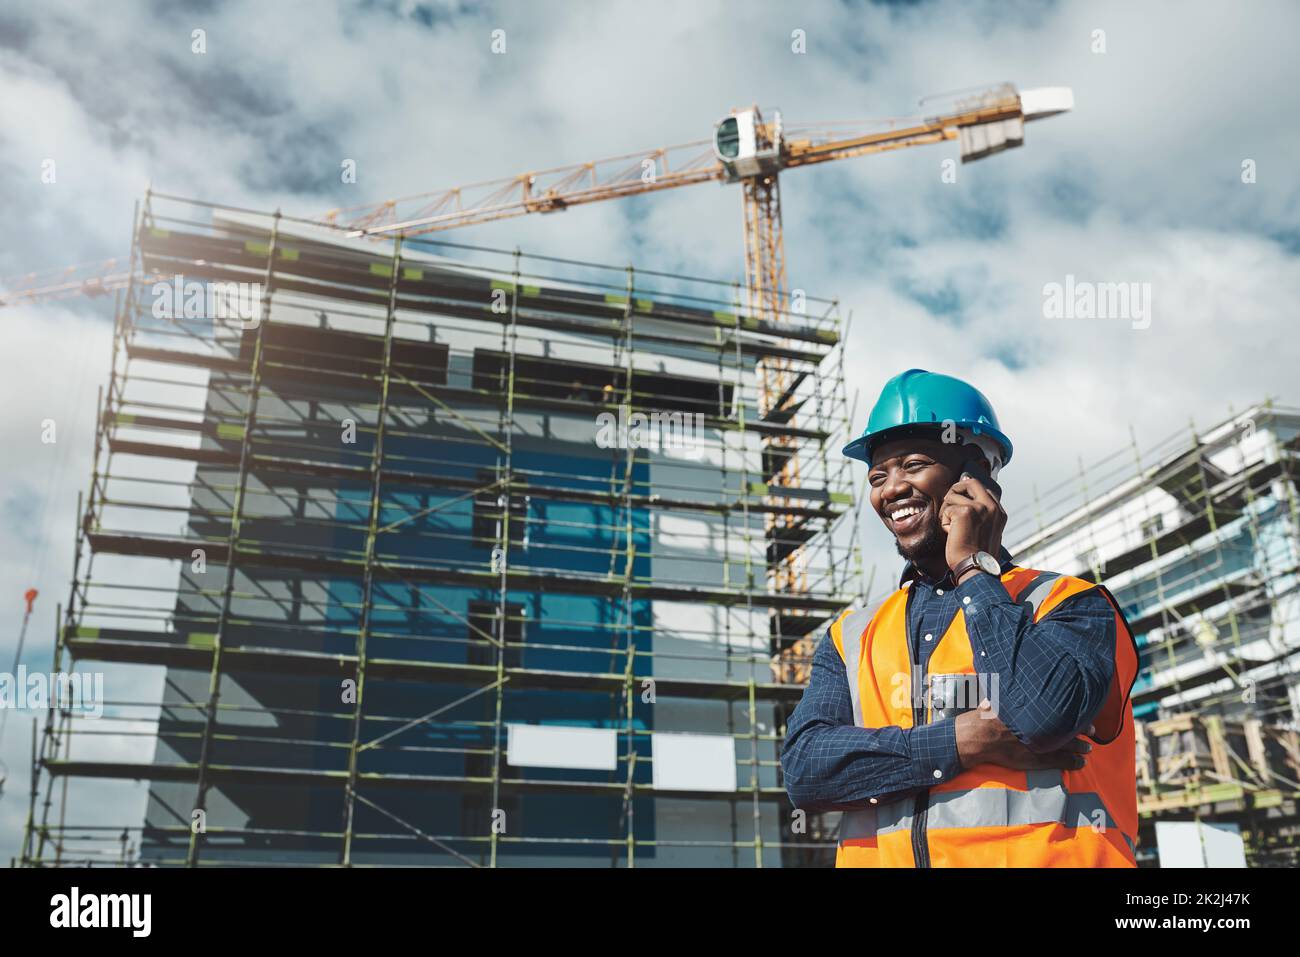 The best building contractor on the block. Shot of a young man using a smartphone while working at a construction site. Stock Photo